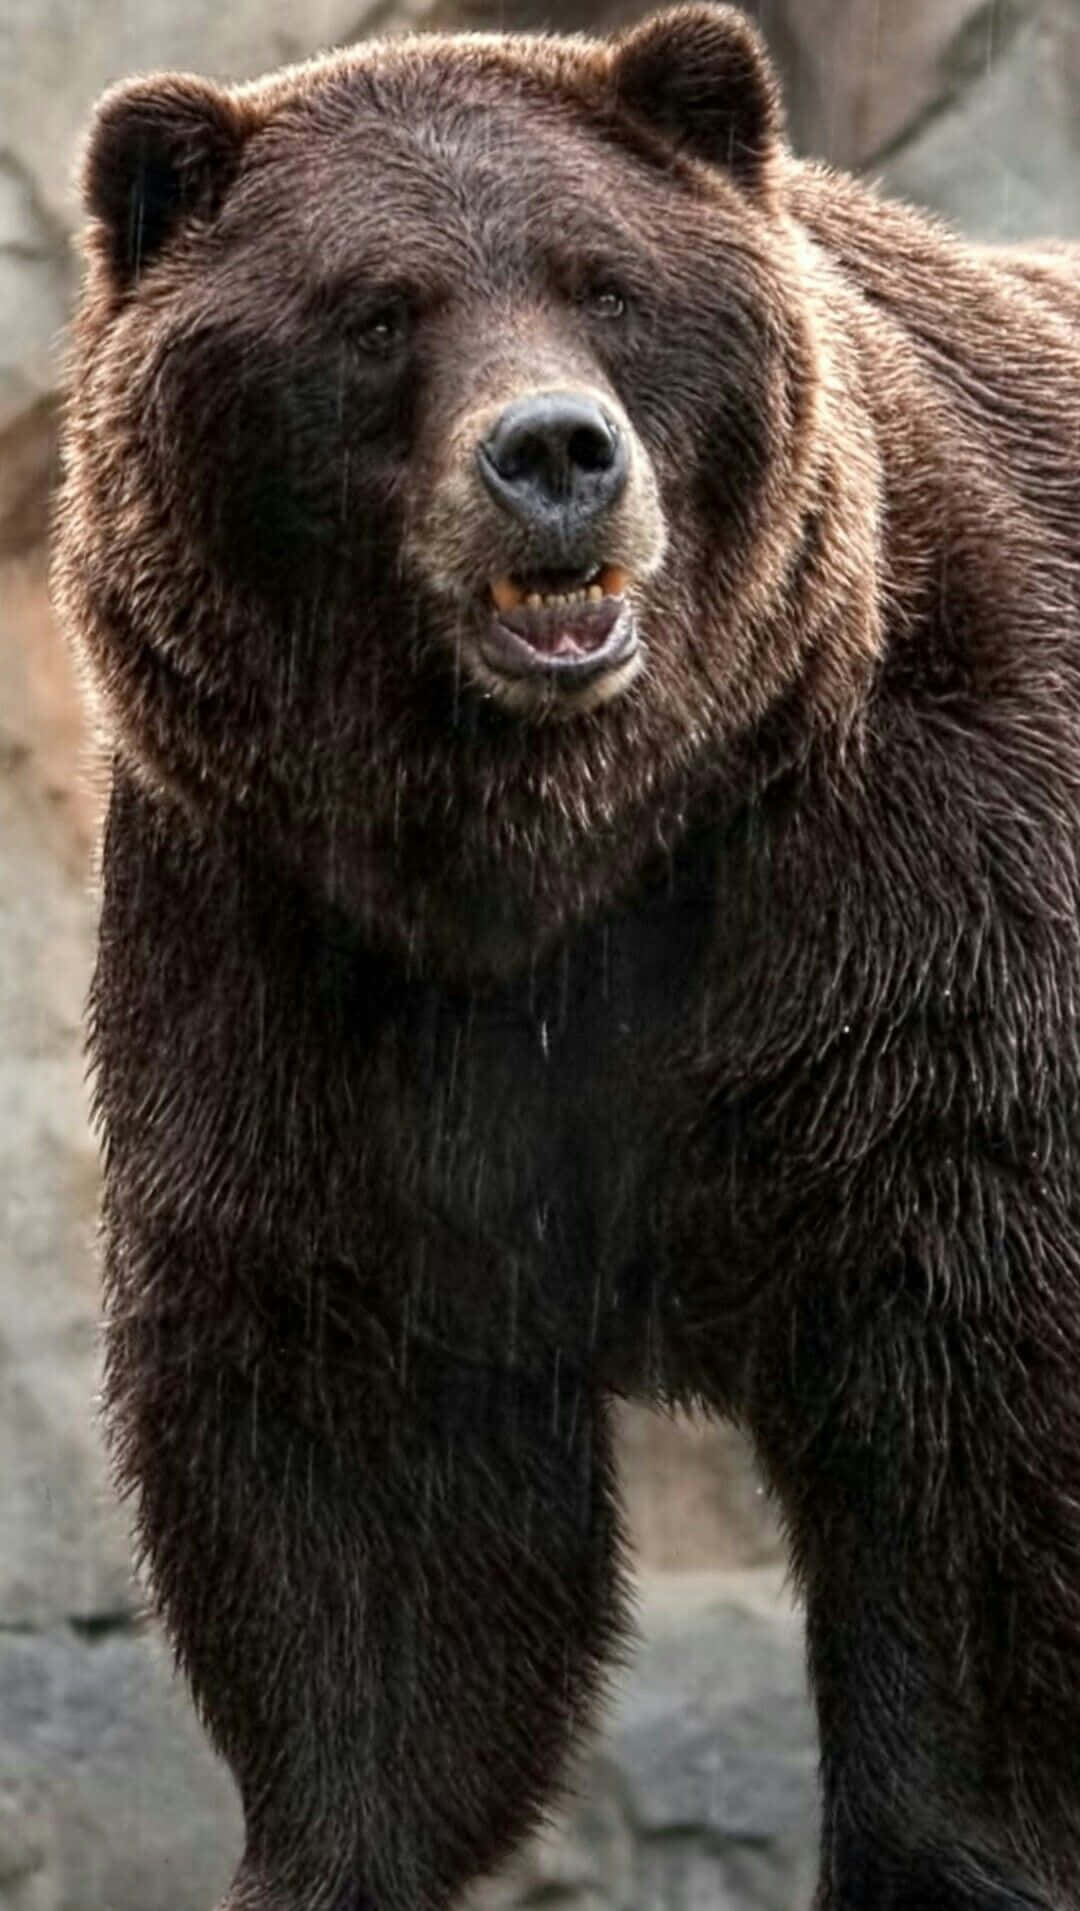 A grizzly bear stands threateningly ready to attack.